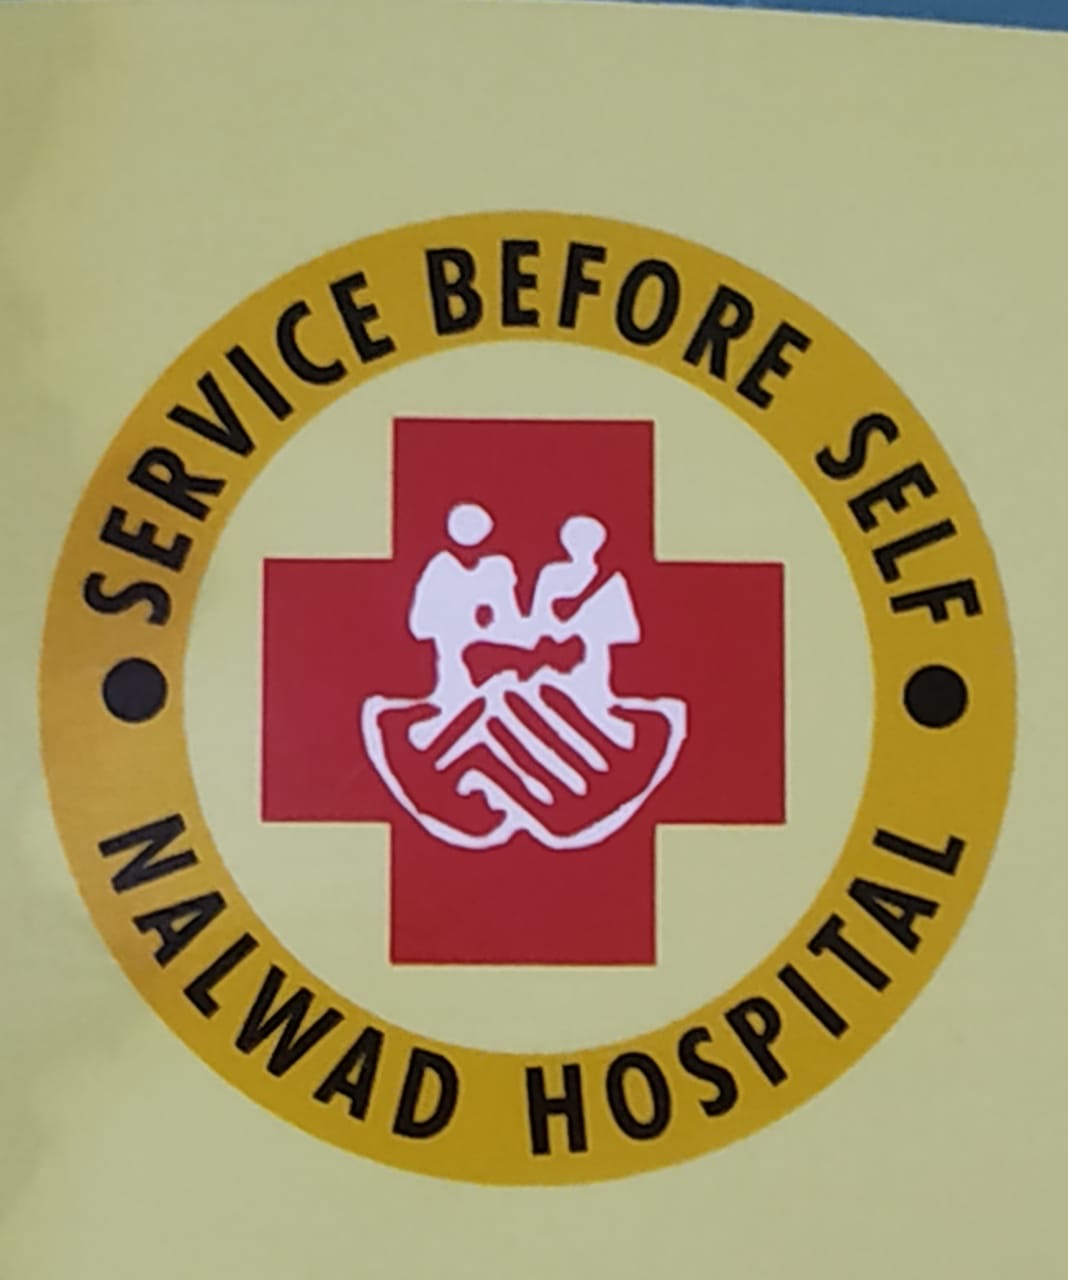 Nalwad Multispecialty Hospital and Research Centre